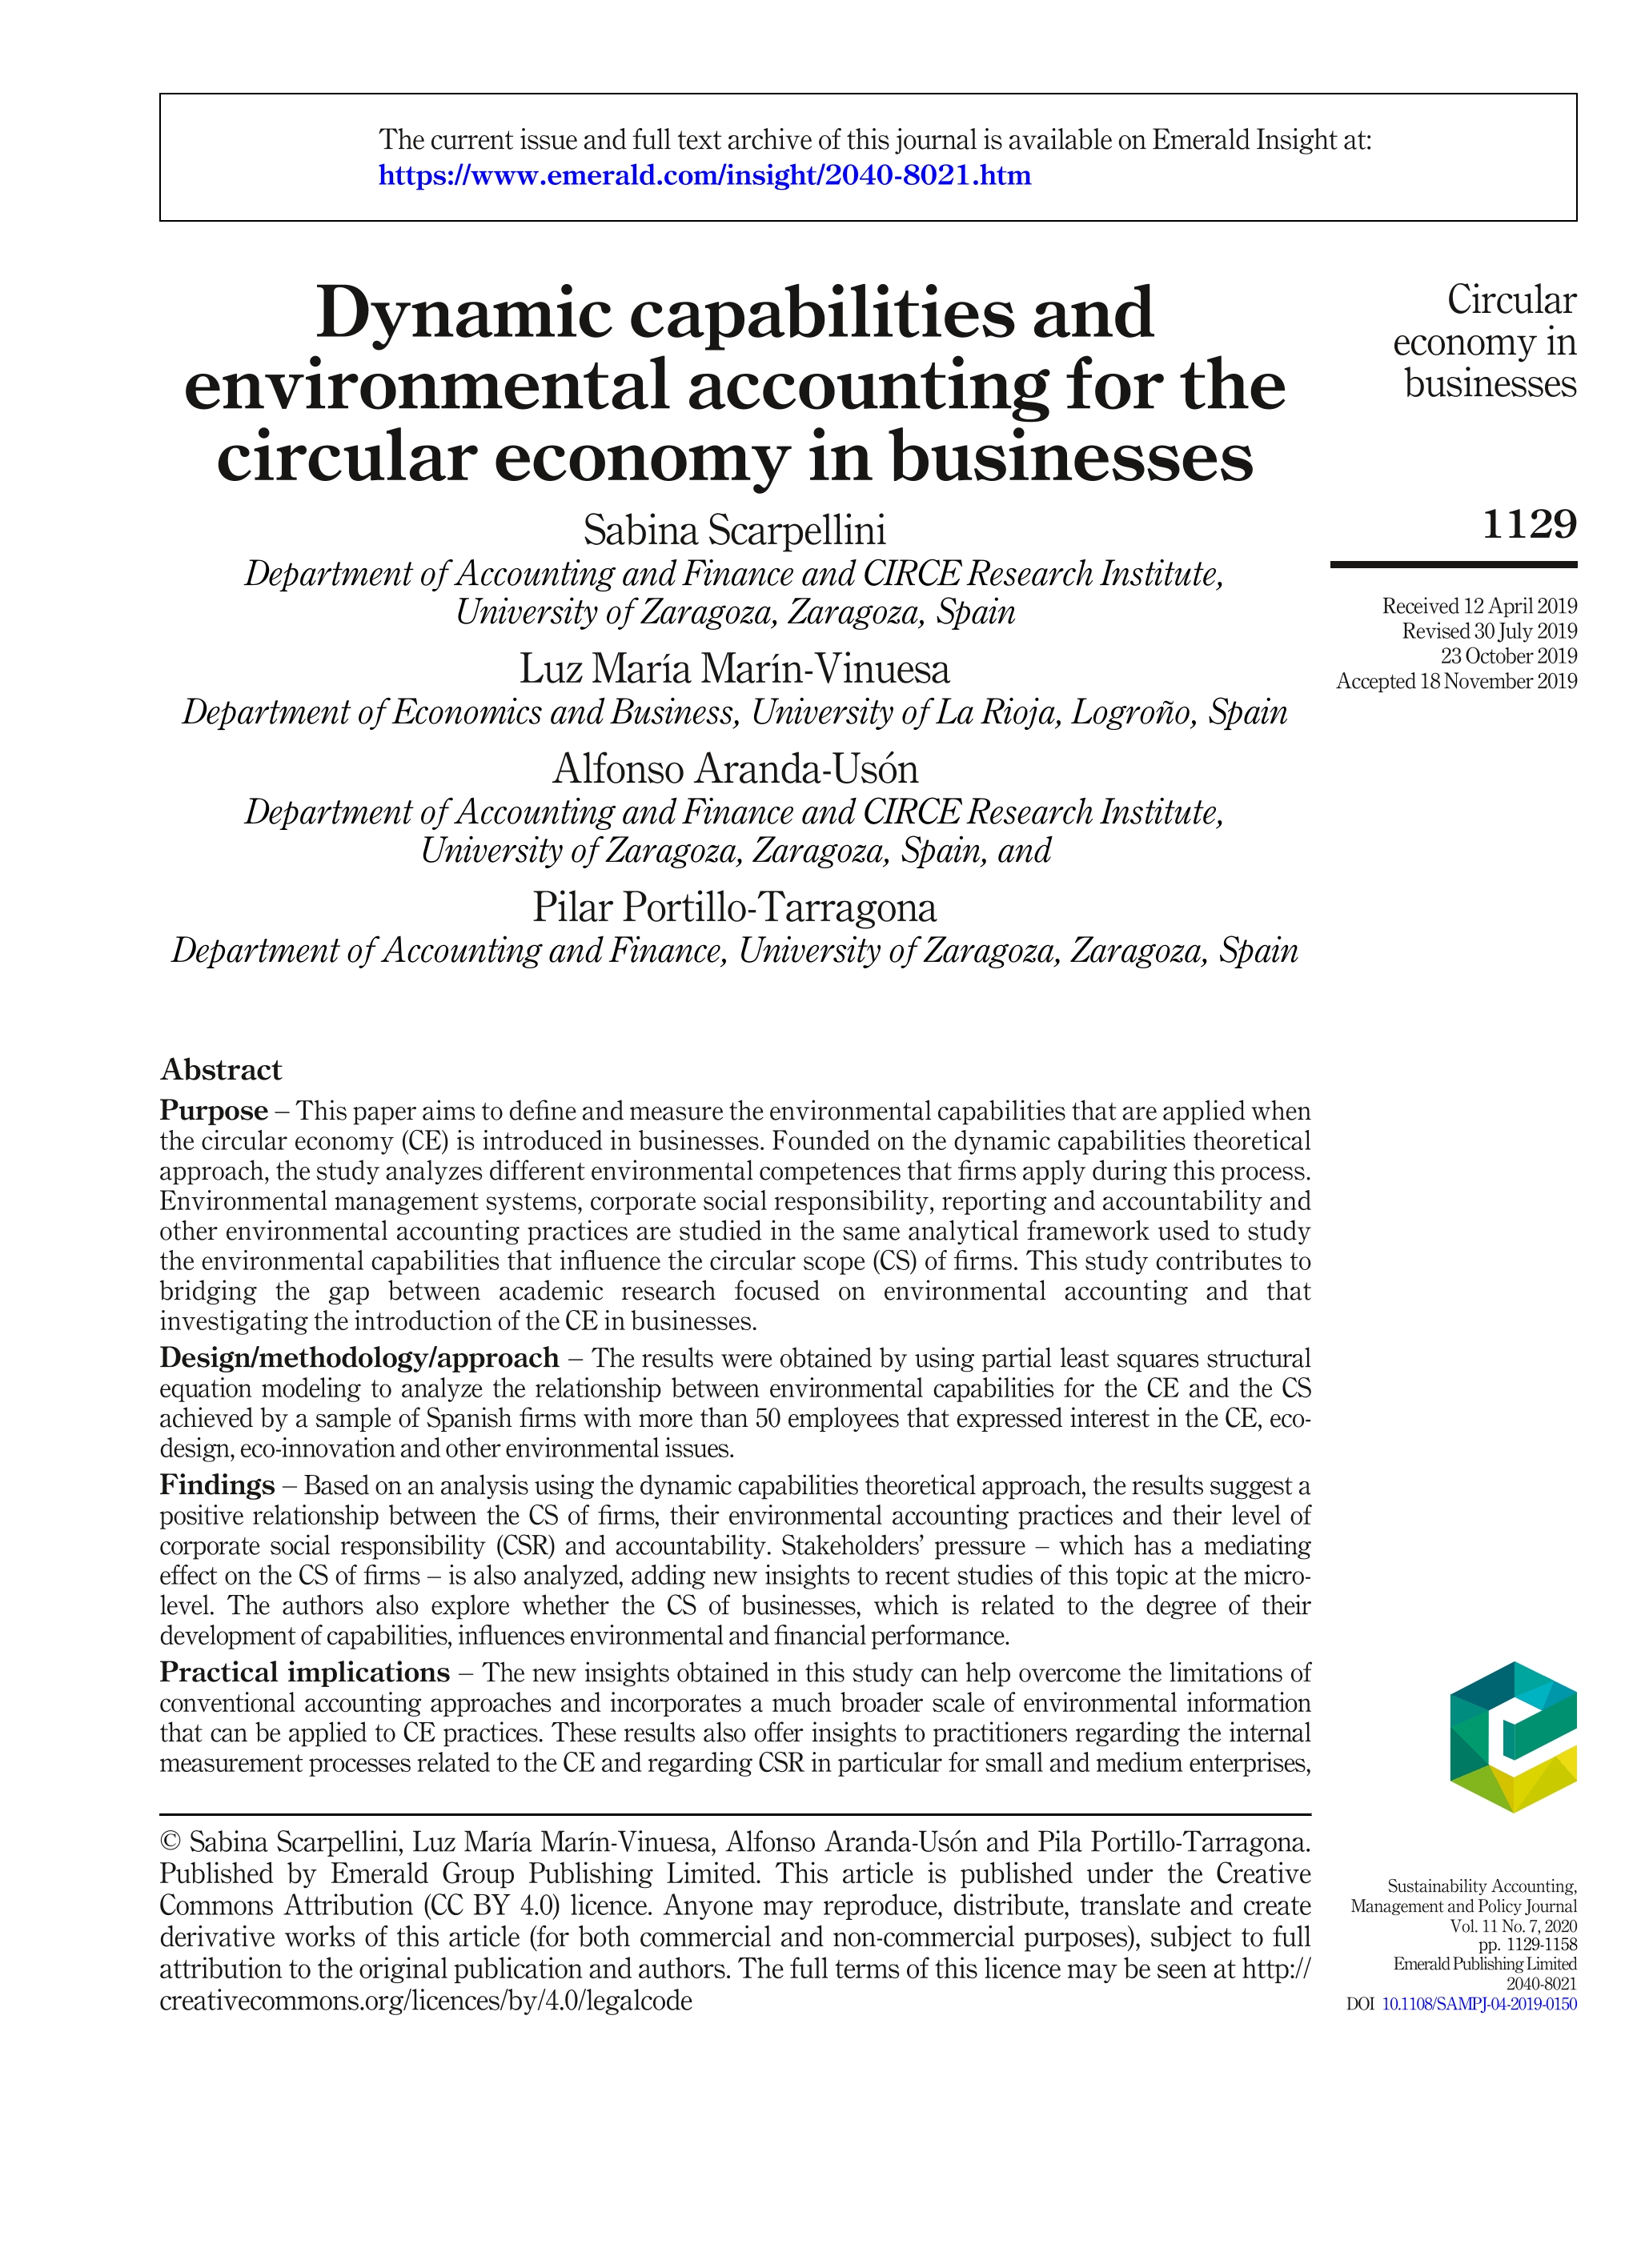 Dynamic capabilities and environmental accounting for the circular economy in businesses